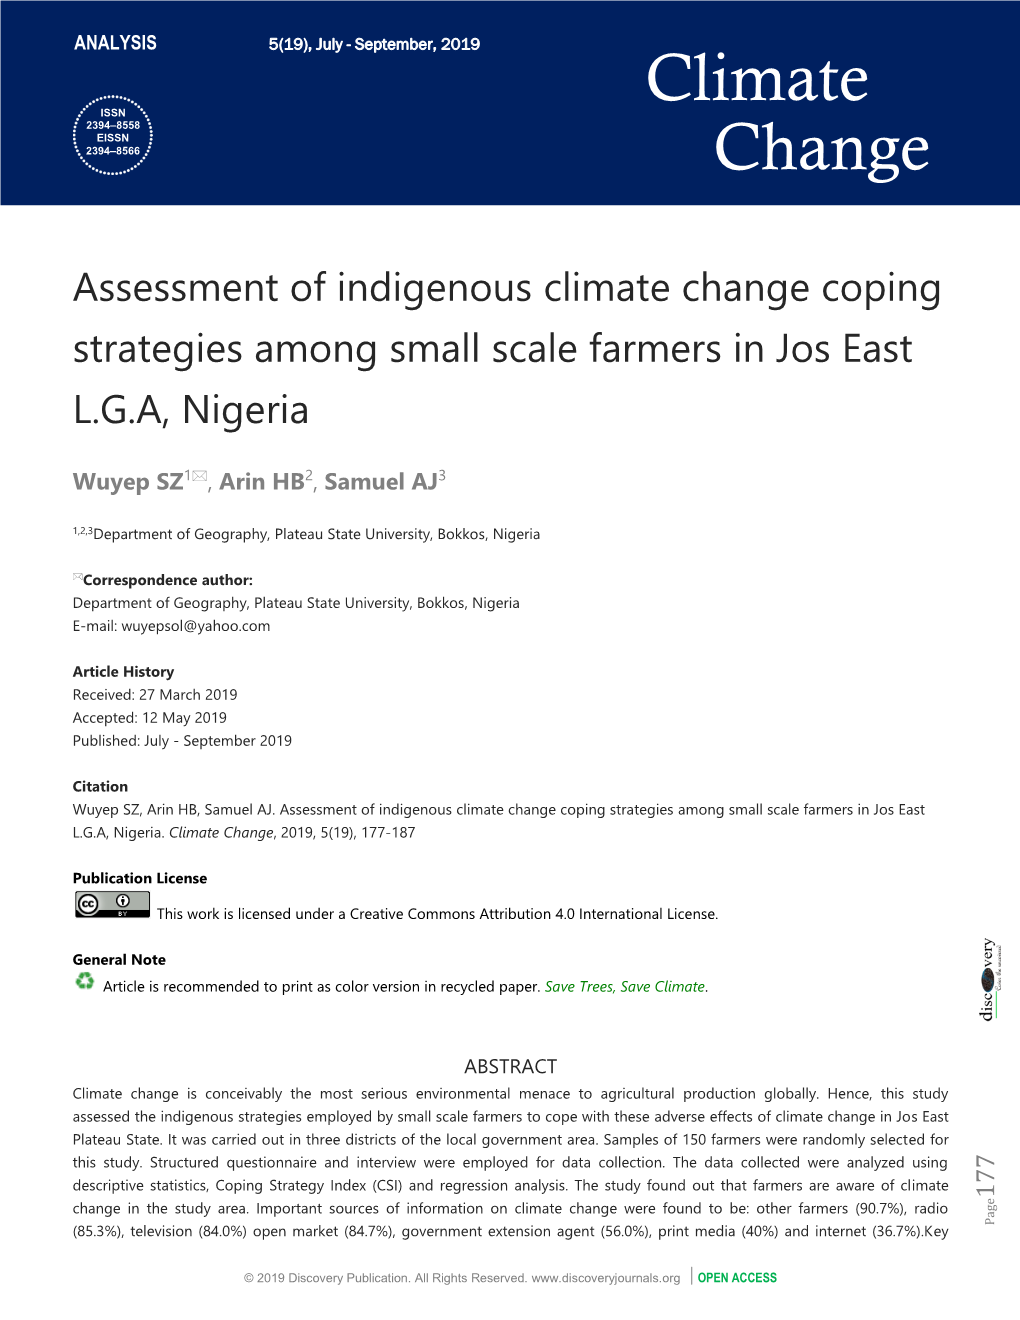 Climate Change Coping Strategies Among Small Scale Farmers in Jos East L.G.A, Nigeria